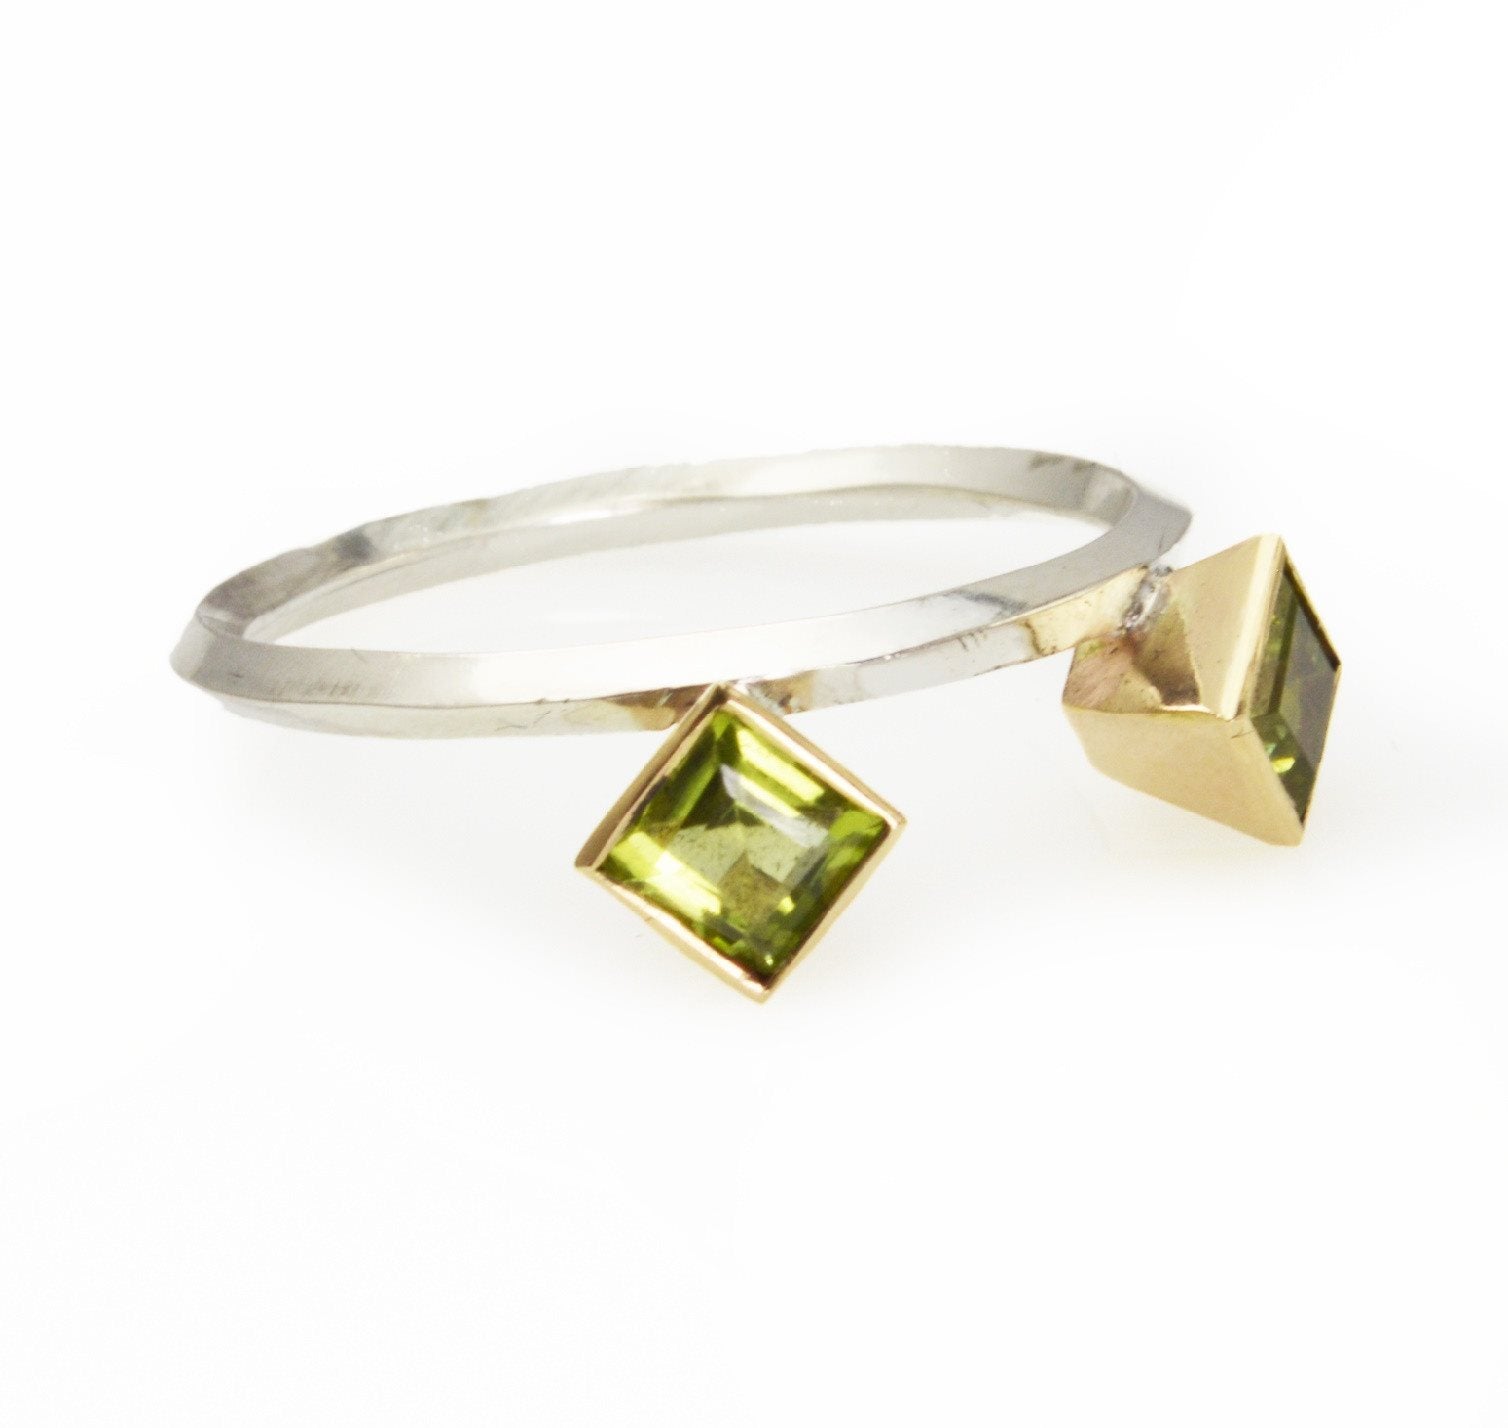 Two Square Peridots set in 14k Gold Geometric Stacking Ring